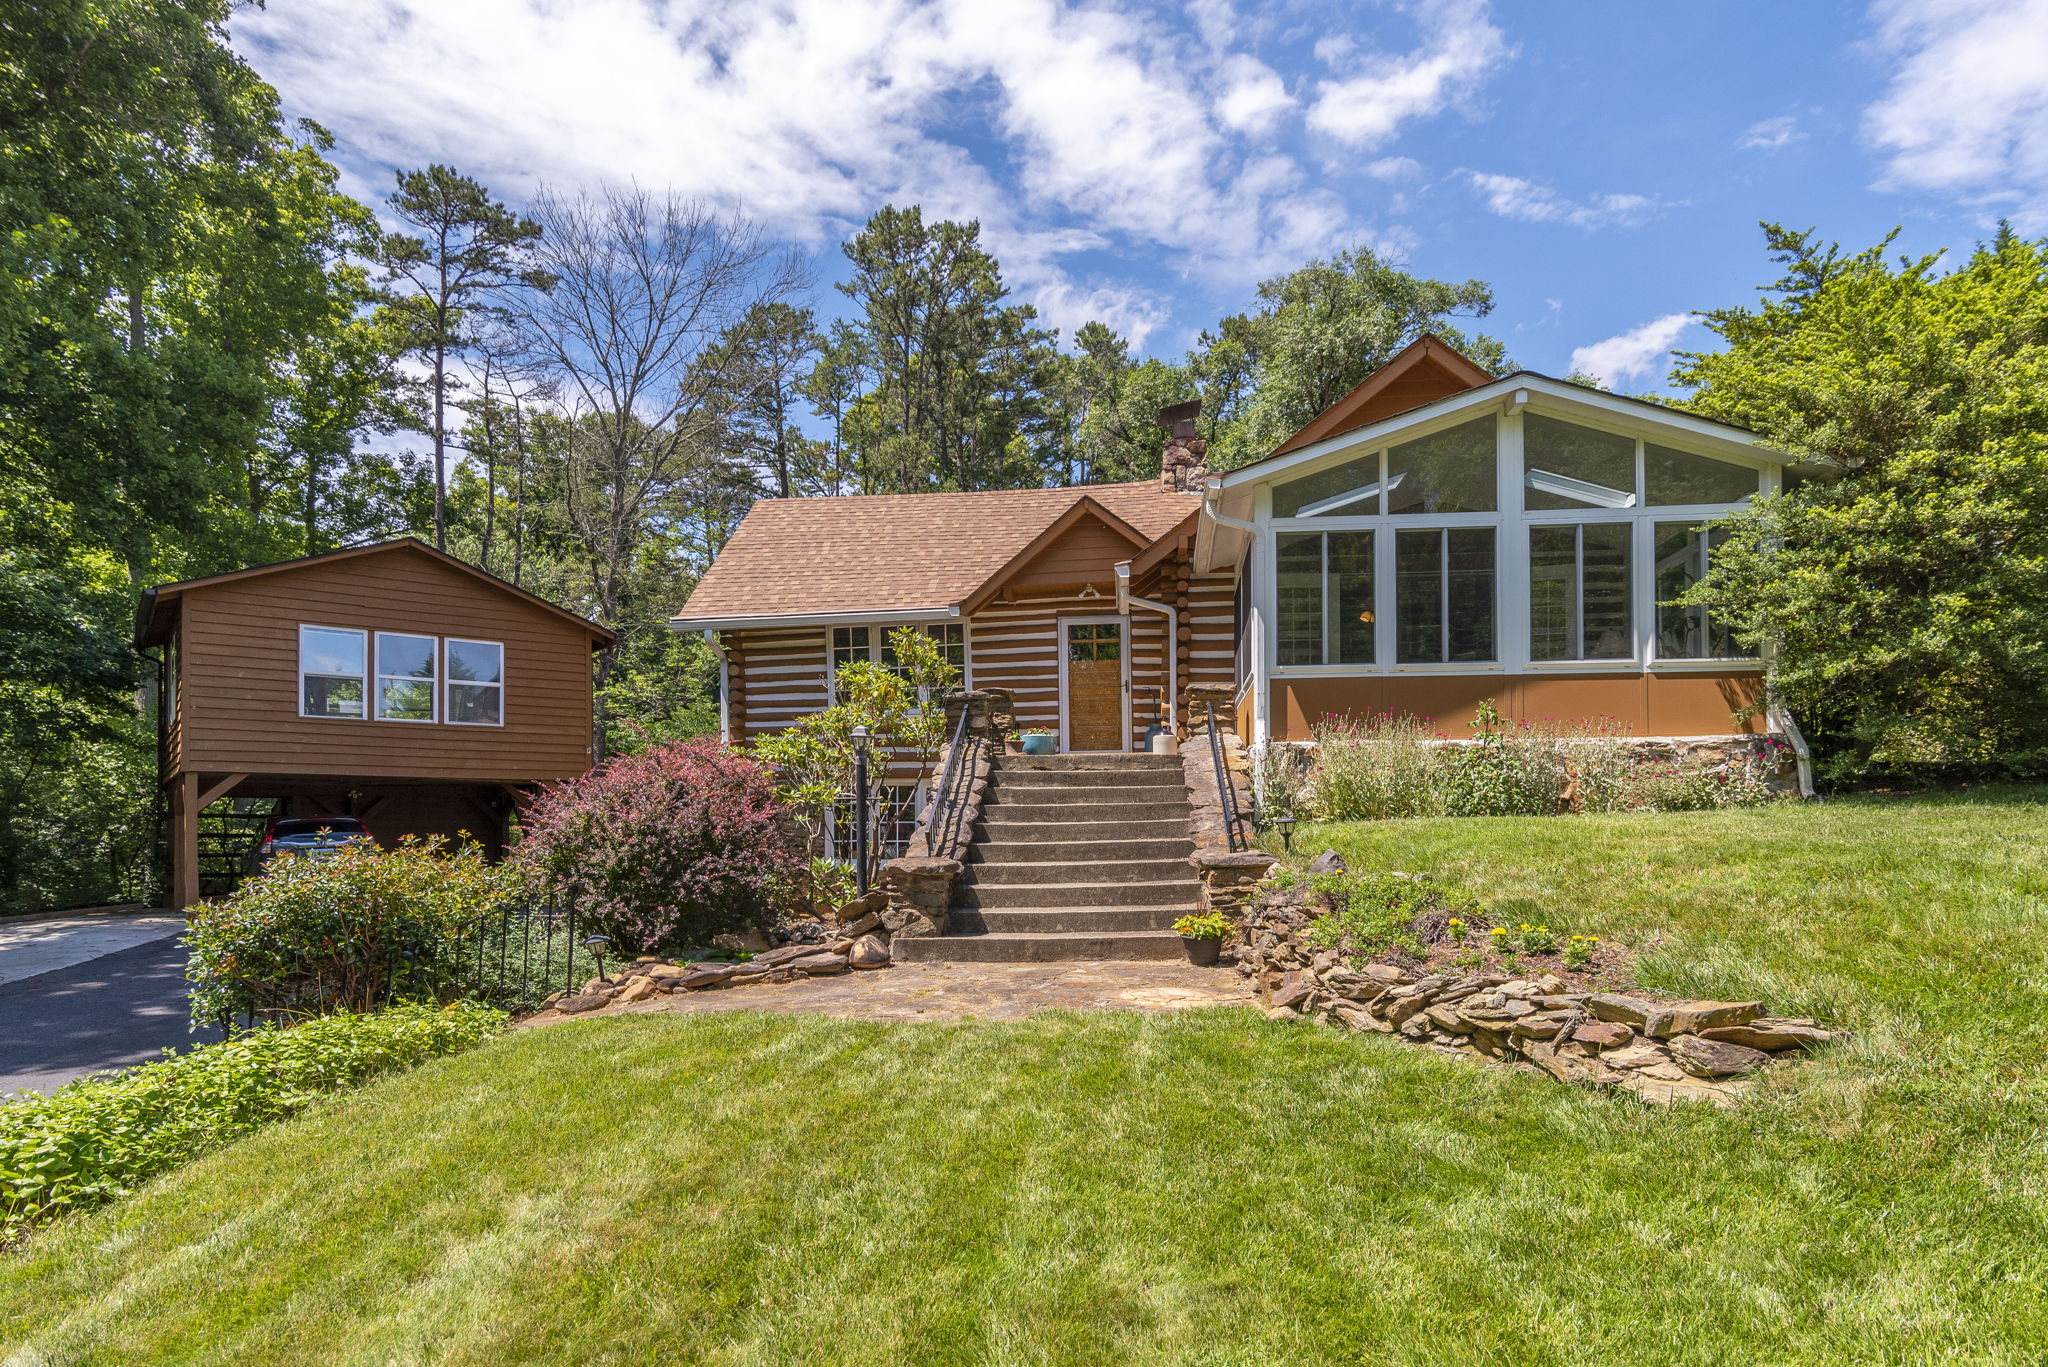  266 Old Haw Creek Rd, Asheville, NC 28805, US